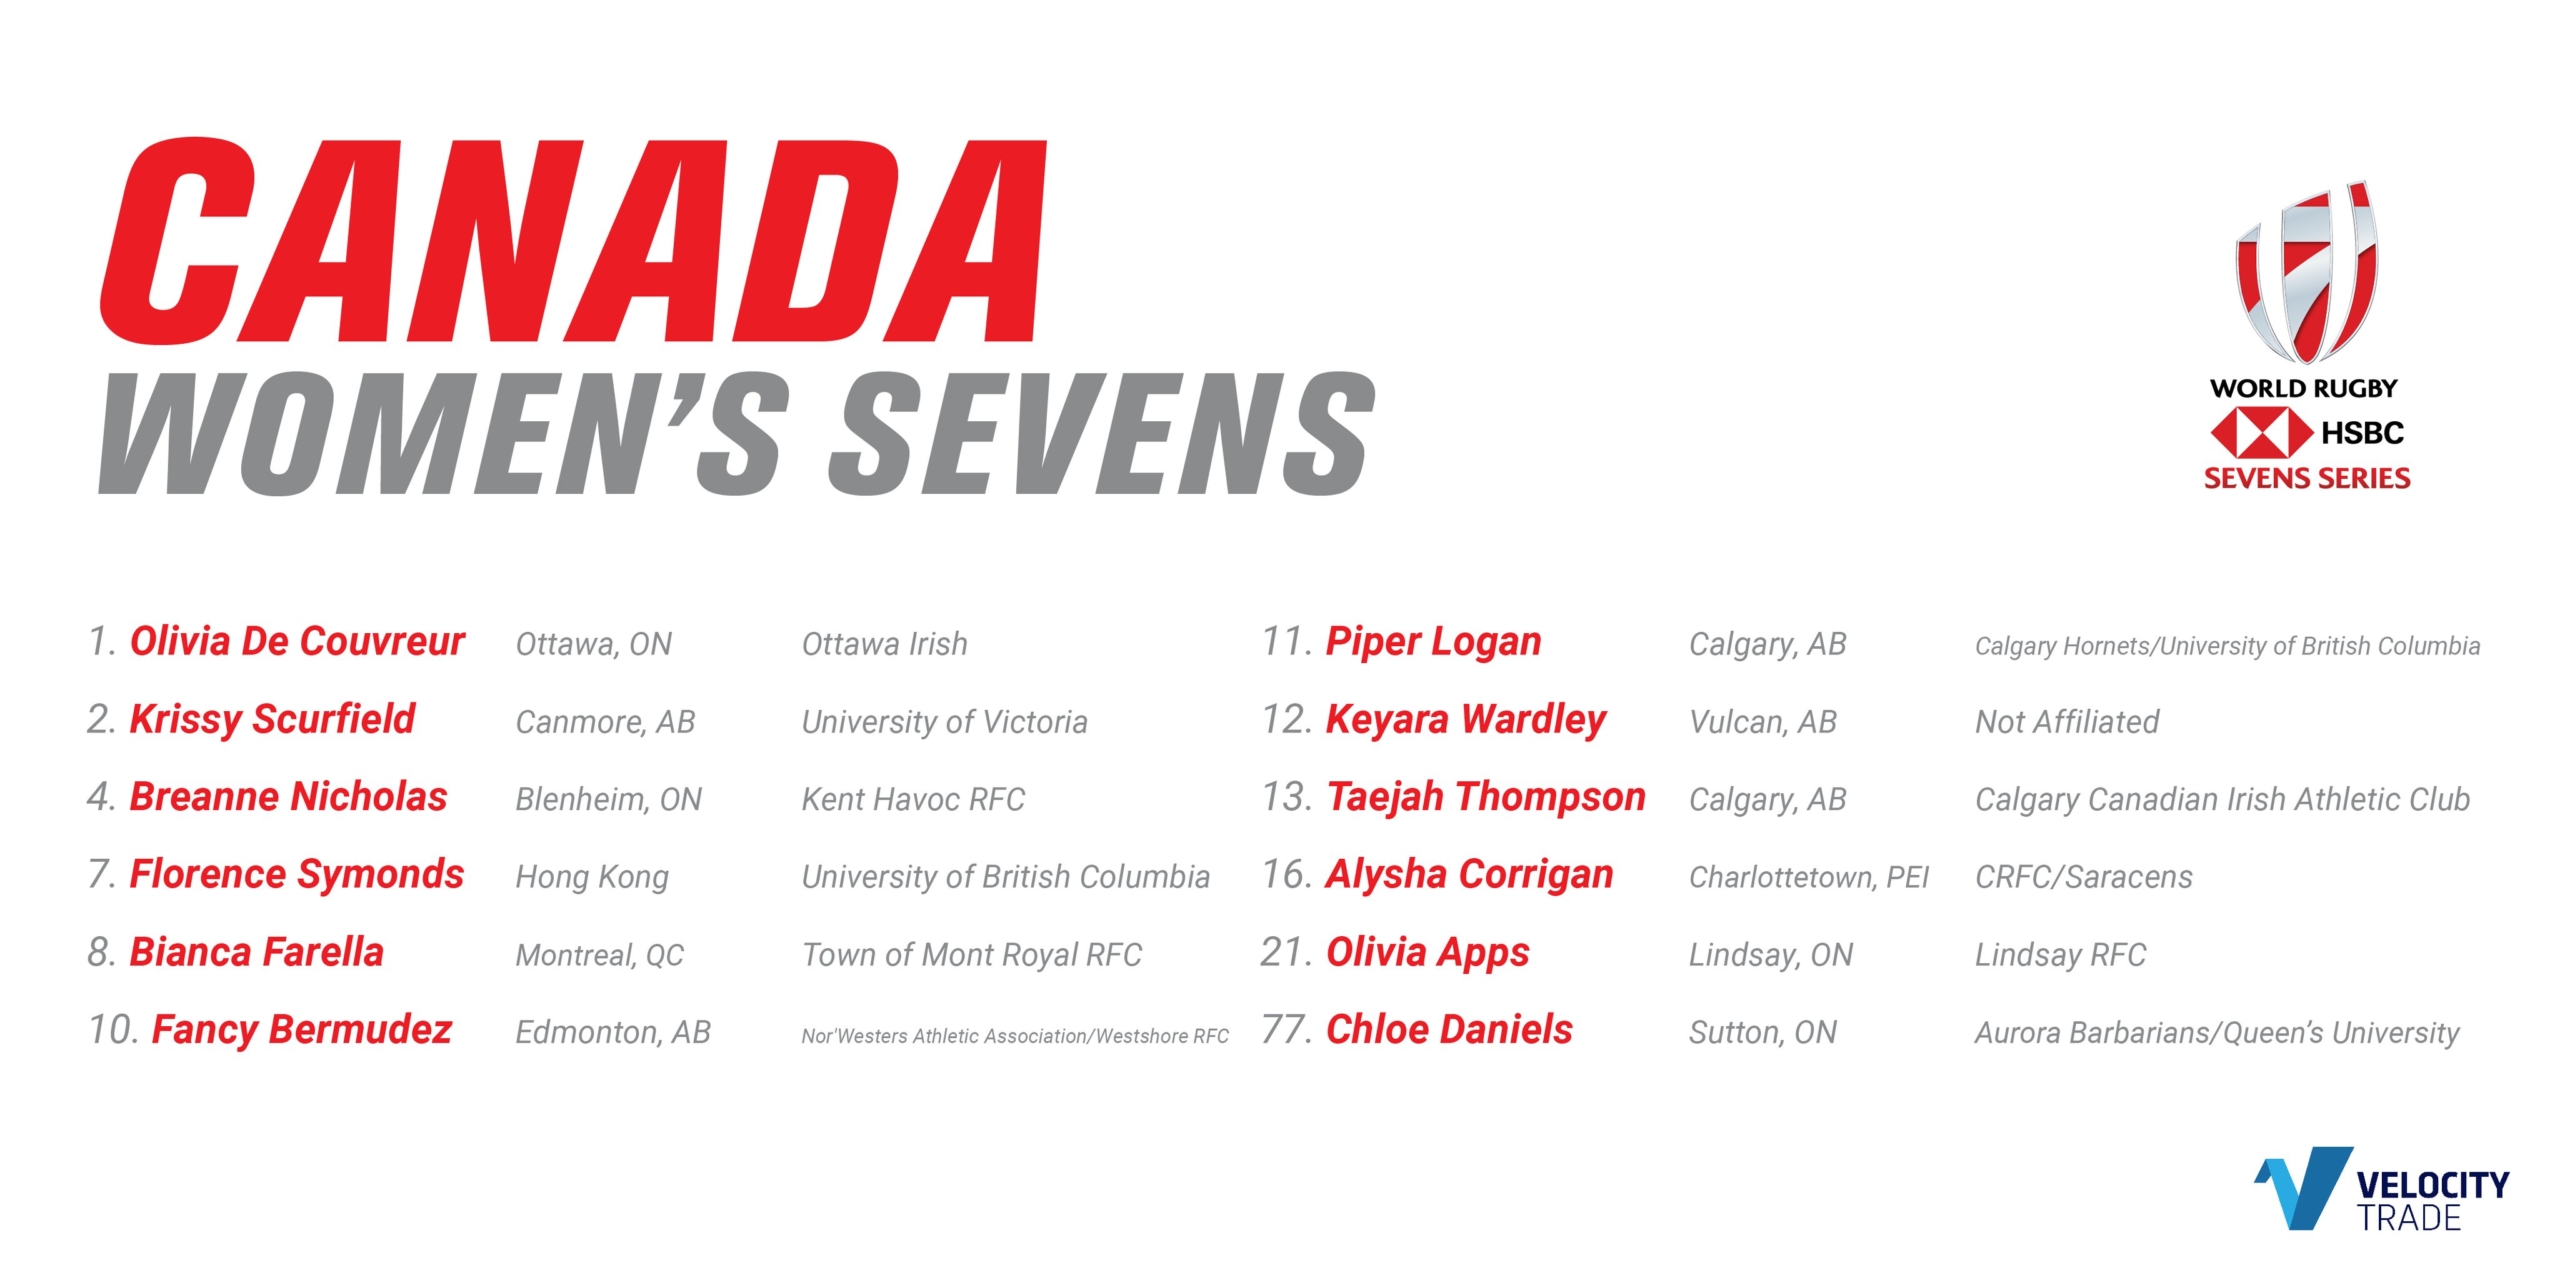 A graphic depicting Canada Women's Sevens team selected for the HSBC Canada Sevens in Vancouver